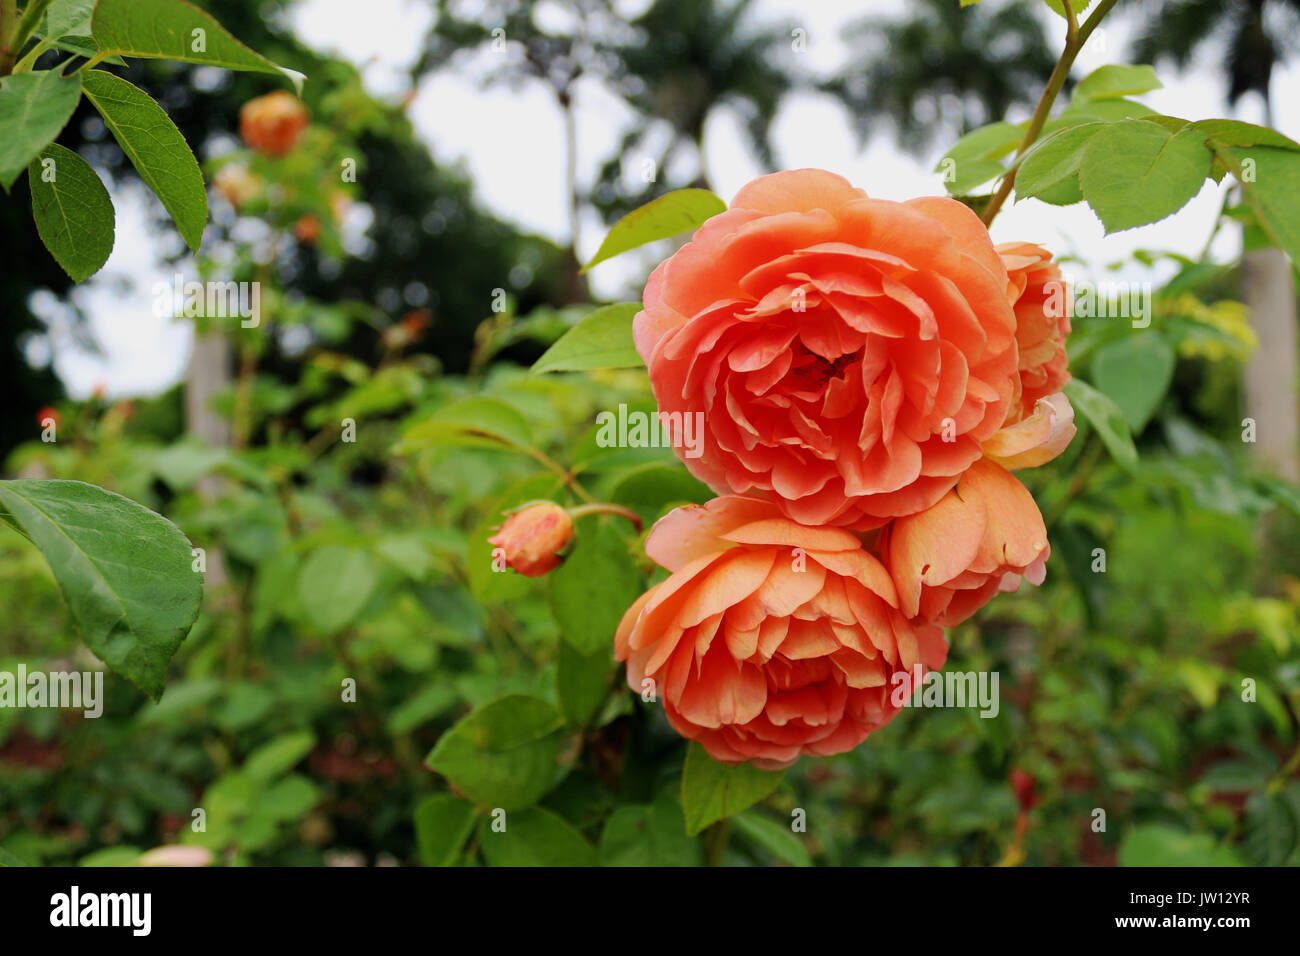 A bundle of peach roses in a rose bush with  green leafy background. Stock Photo